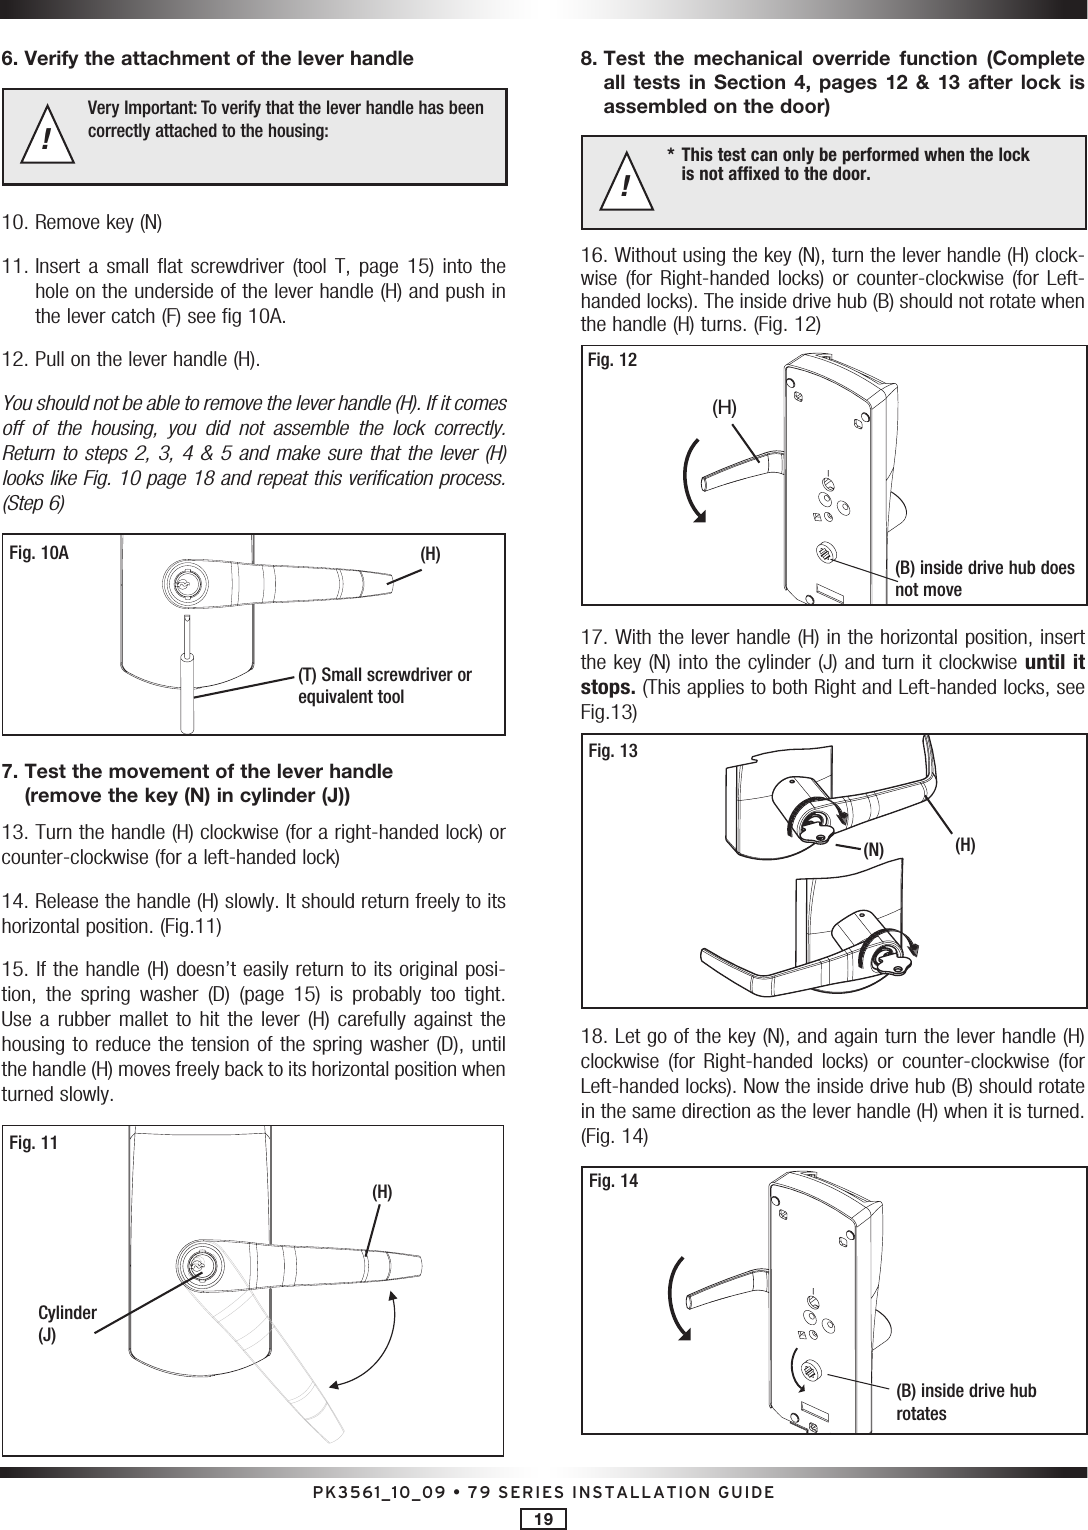 PK3561_10_09 • 79 SERIES INSTALLATION GUIDE196. Verify the attachment of the lever handle Very Important: To verify that the lever handle has been correctly attached to the housing: !10. Remove key (N)11.  Insert  a  small  flat  screwdriver  (tool  T,  page  15)  into  the  hole on the underside of the lever handle (H) and push in the lever catch (F) see fig 10A.12. Pull on the lever handle (H). You should not be able to remove the lever handle (H). If it comes off  of  the  housing,  you  did  not  assemble  the  lock  correctly. Return to steps 2, 3, 4 &amp; 5 and make sure that the lever (H) looks like Fig. 10 page 18 and repeat this verification process. (Step 6)Fig. 10A(T) Small screwdriver or equivalent tool(H)7.  Test the movement of the lever handle (remove the key (N) in cylinder (J))13. Turn the handle (H) clockwise (for a right-handed lock) or counter-clockwise (for a left-handed lock)14. Release the handle (H) slowly. It should return freely to its horizontal position. (Fig.11)15. If the handle (H) doesn’t easily return to its original posi-tion,  the  spring  washer  (D)  (page  15)  is  probably  too  tight. Use a  rubber mallet  to hit  the lever  (H) carefully  against the housing to reduce the tension of the spring washer (D), until the handle (H) moves freely back to its horizontal position when turned slowly.Fig. 11(H)Cylinder (J)8.  Test  the  mechanical  override  function  (Complete all  tests  in  Section  4,  pages  12  &amp;  13  after  lock  is assembled on the door) *  This test can only be performed when the lock   is not affixed to the door.!16. Without using the key (N), turn the lever handle (H) clock-wise  (for  Right-handed  locks)  or  counter-clockwise  (for  Left-handed locks). The inside drive hub (B) should not rotate when the handle (H) turns. (Fig. 12)Fig. 12(B) inside drive hub does not move(H)17. With the lever handle (H) in the horizontal position, insert the key (N) into the cylinder (J) and turn it clockwise until it stops. (This applies to both Right and Left-handed locks, see Fig.13) Fig. 13(H)(N)18. Let go of the key (N), and again turn the lever handle (H) clockwise  (for  Right-handed  locks)  or  counter-clockwise  (for Left-handed locks). Now the inside drive hub (B) should rotate in the same direction as the lever handle (H) when it is turned. (Fig. 14)Fig. 14(B) inside drive hub rotates 